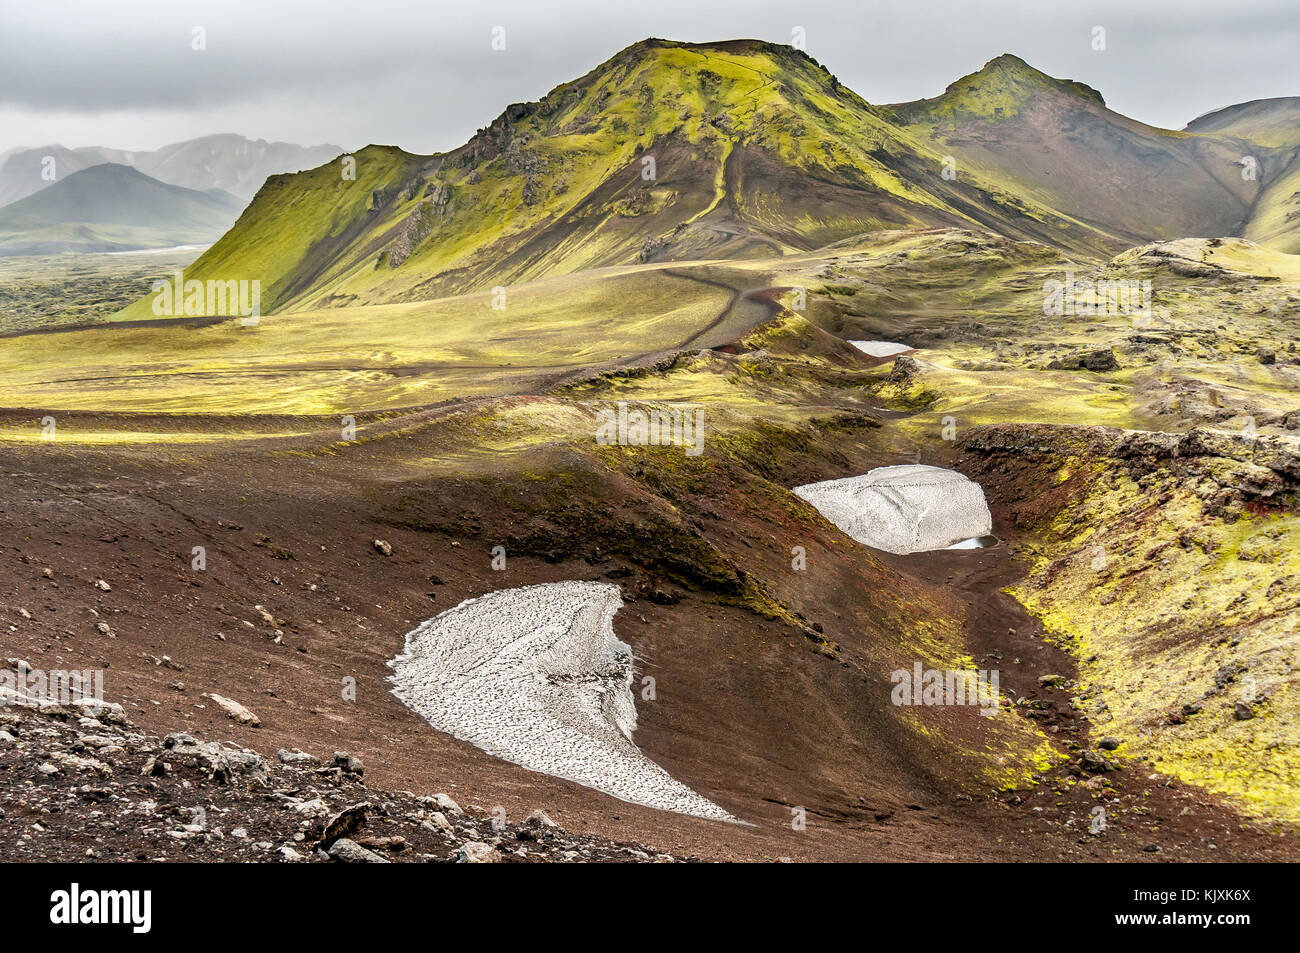 Snow Plates, Red Rock, Green Grass and Volcanic Mountain in the Landmannalaugar Region in Iceland Stock Photo